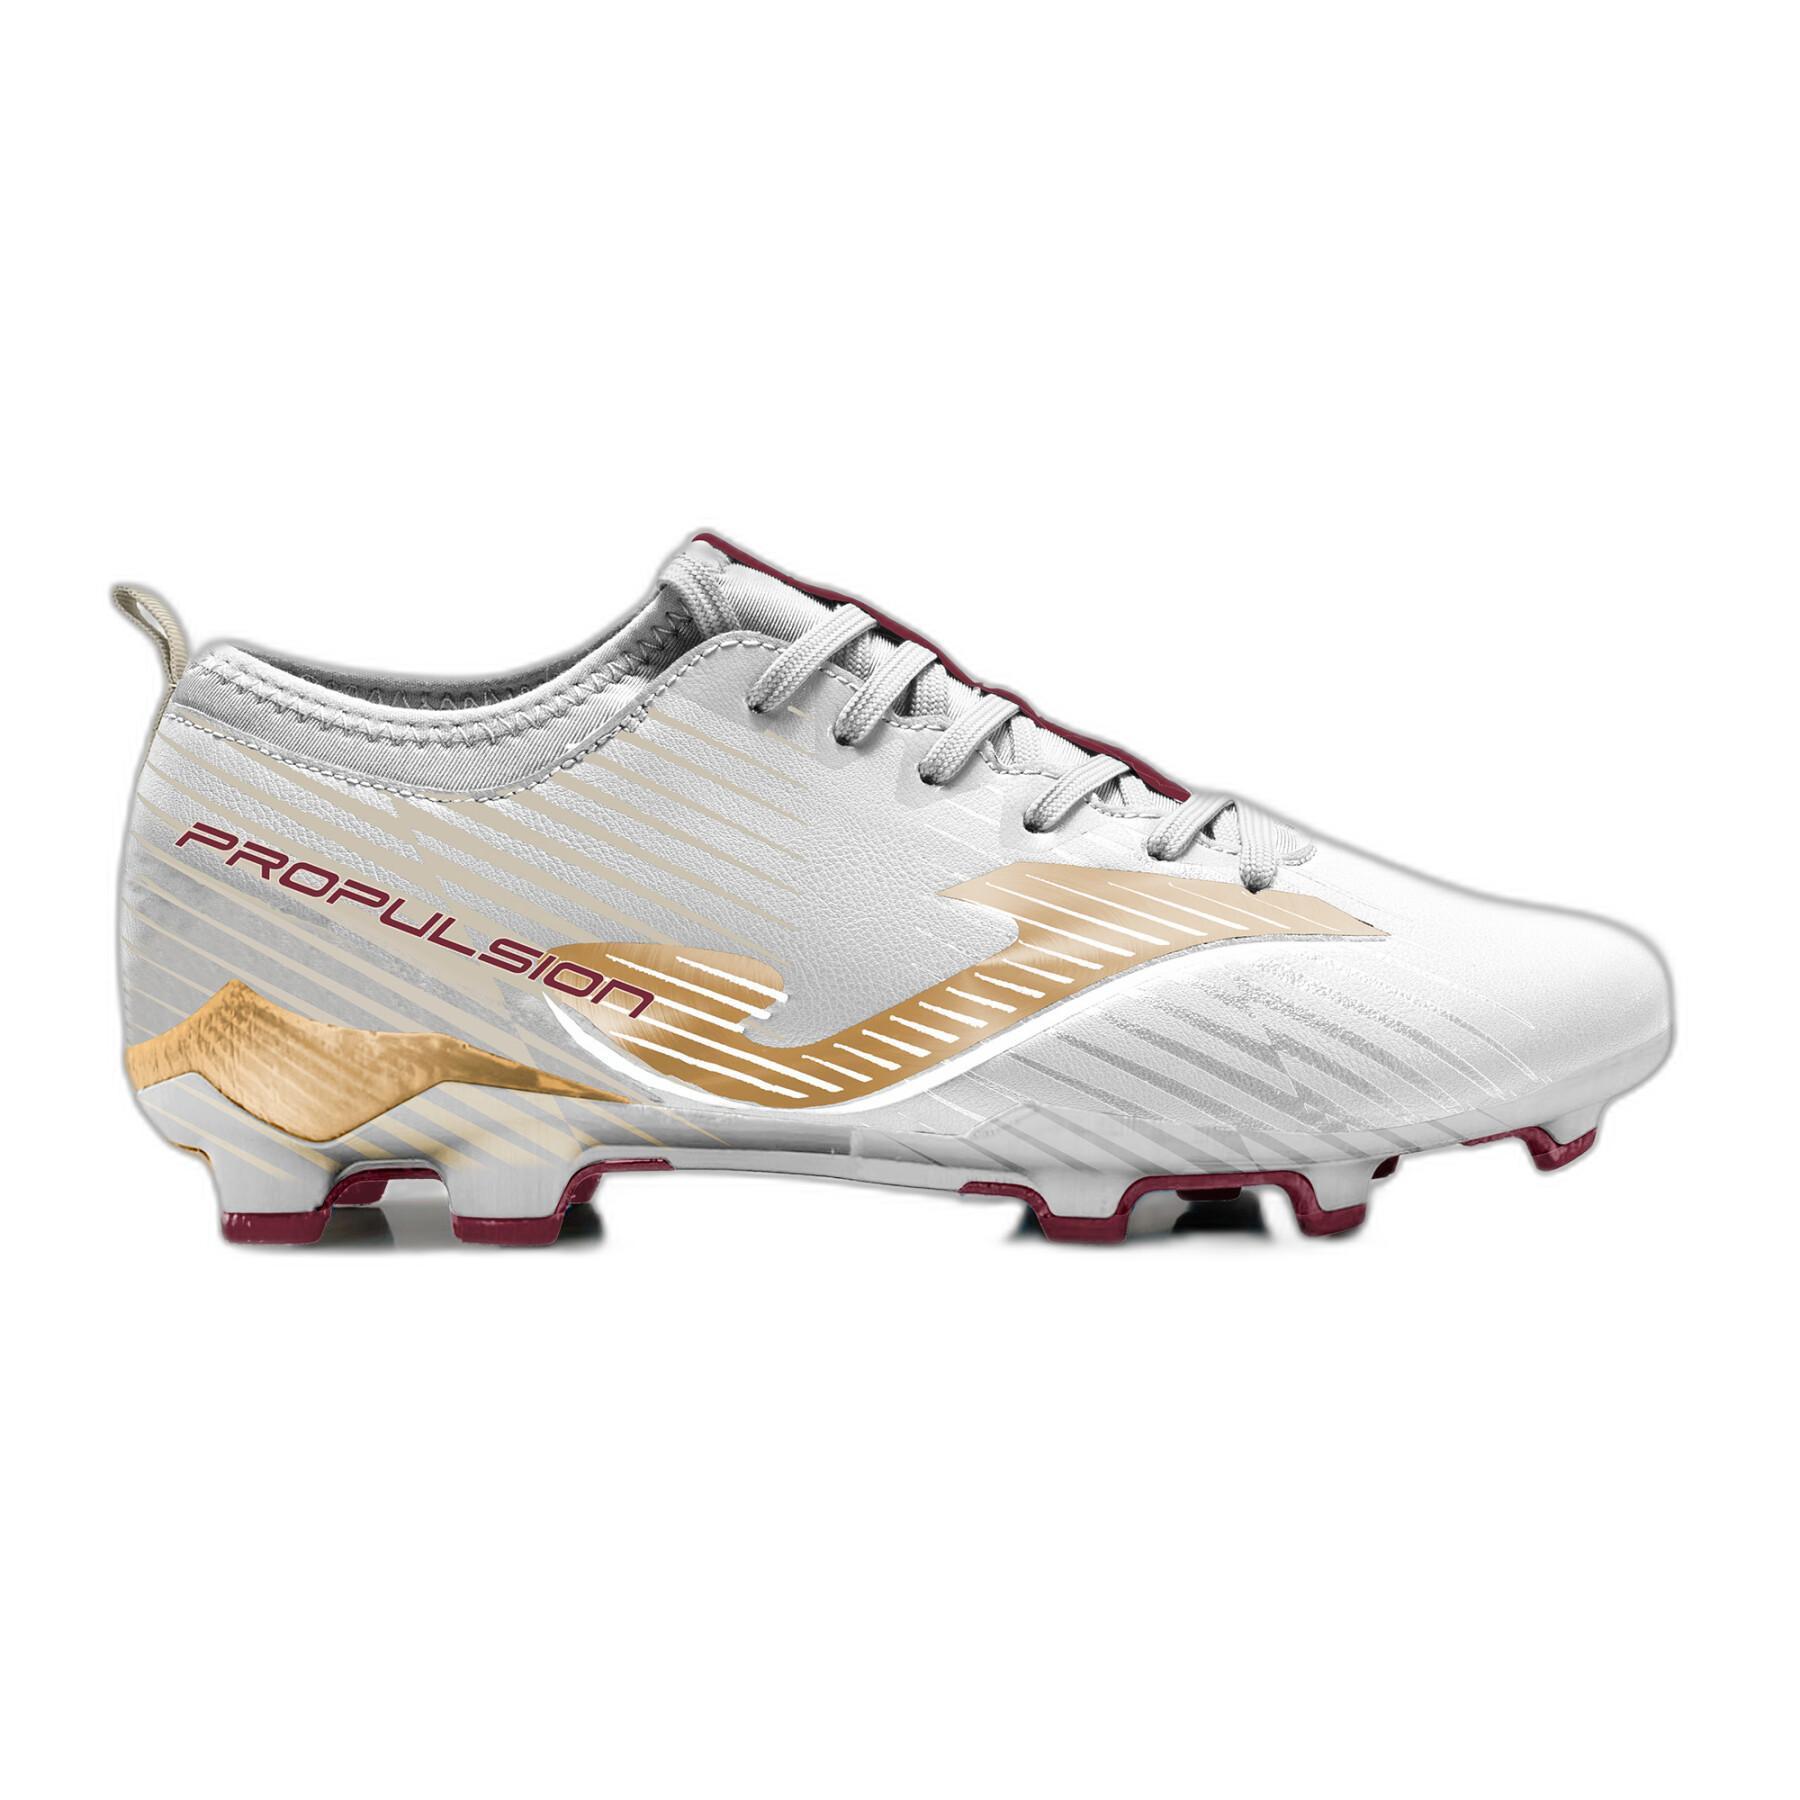 Chaussures de football Joma Propulsion Cup 2402 FG